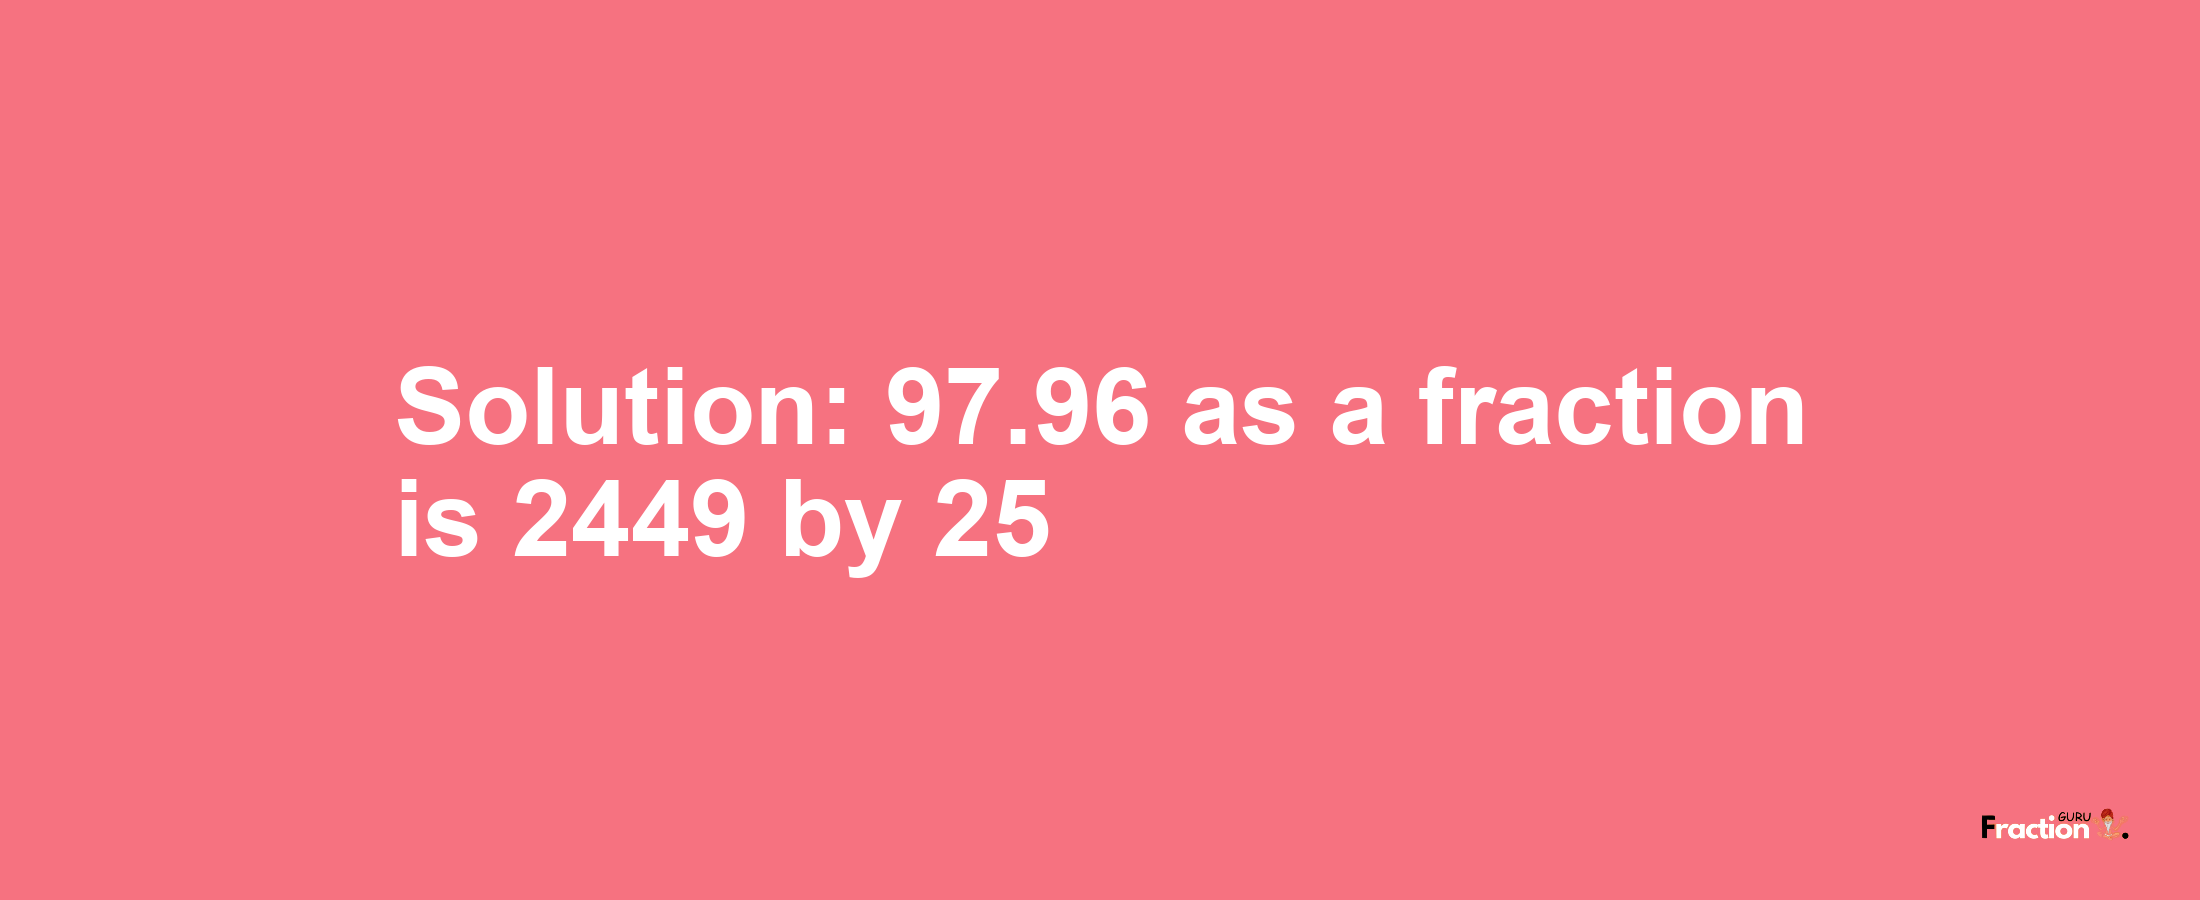 Solution:97.96 as a fraction is 2449/25